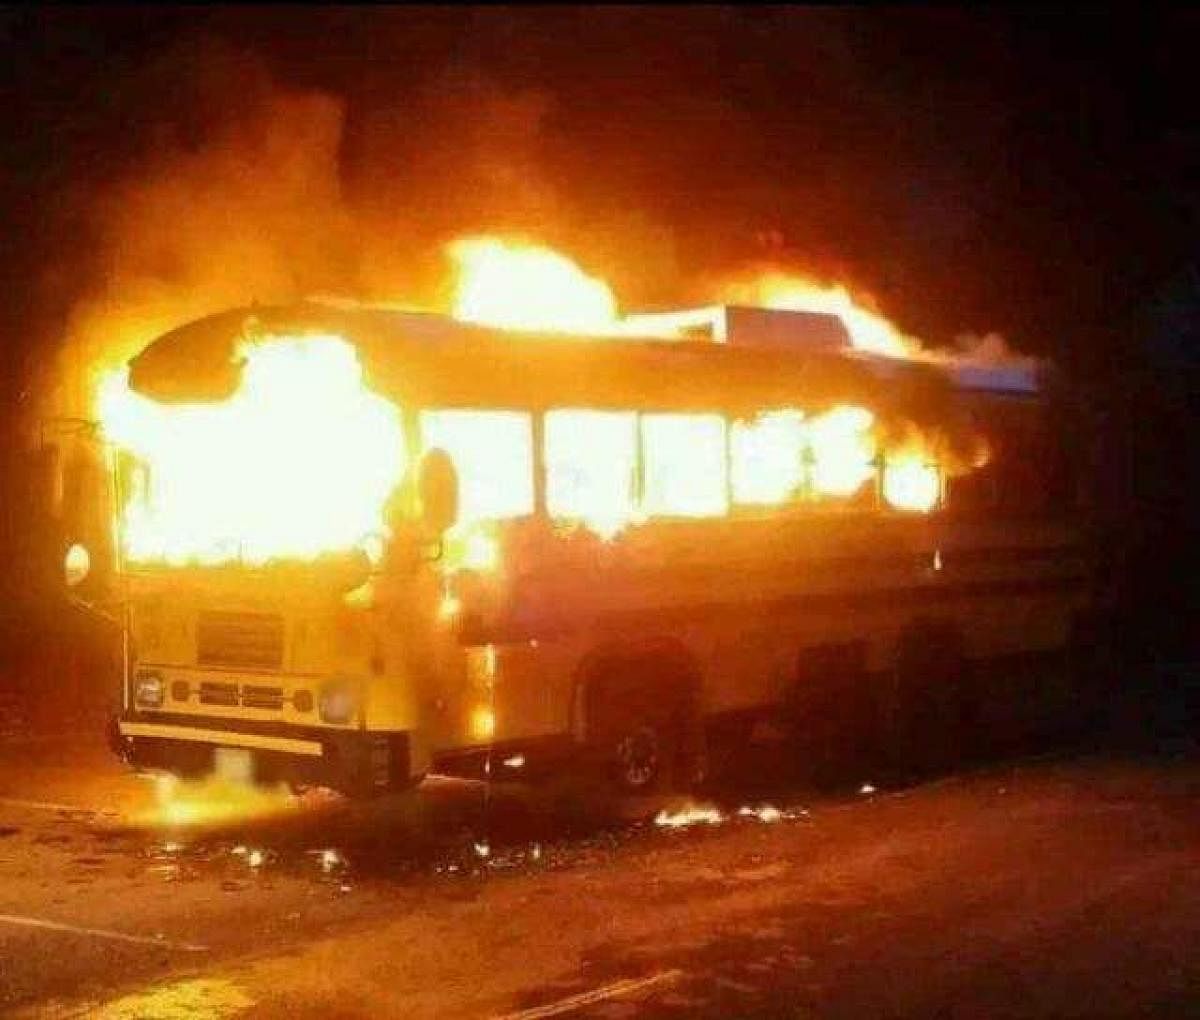 The buses torched by Maoists.